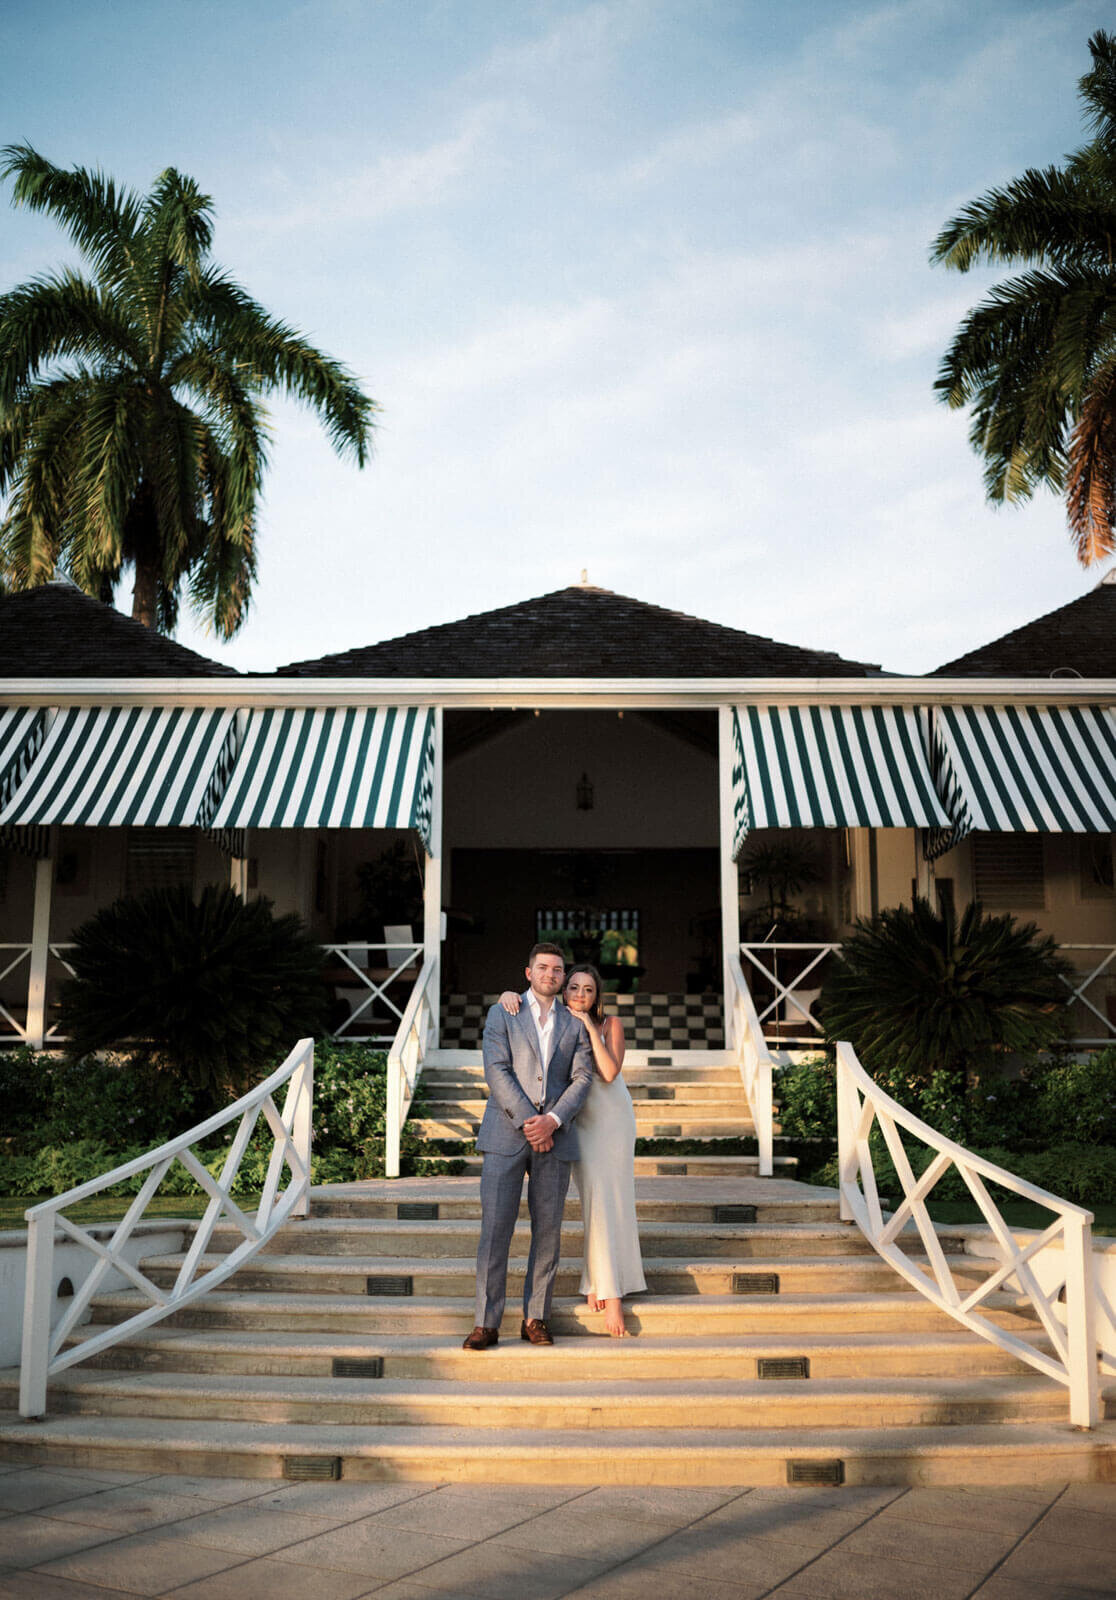 The engaged couple is standing on the staircase that leads to the entrance of Round Hill Hotel and Villas, Jamaica.